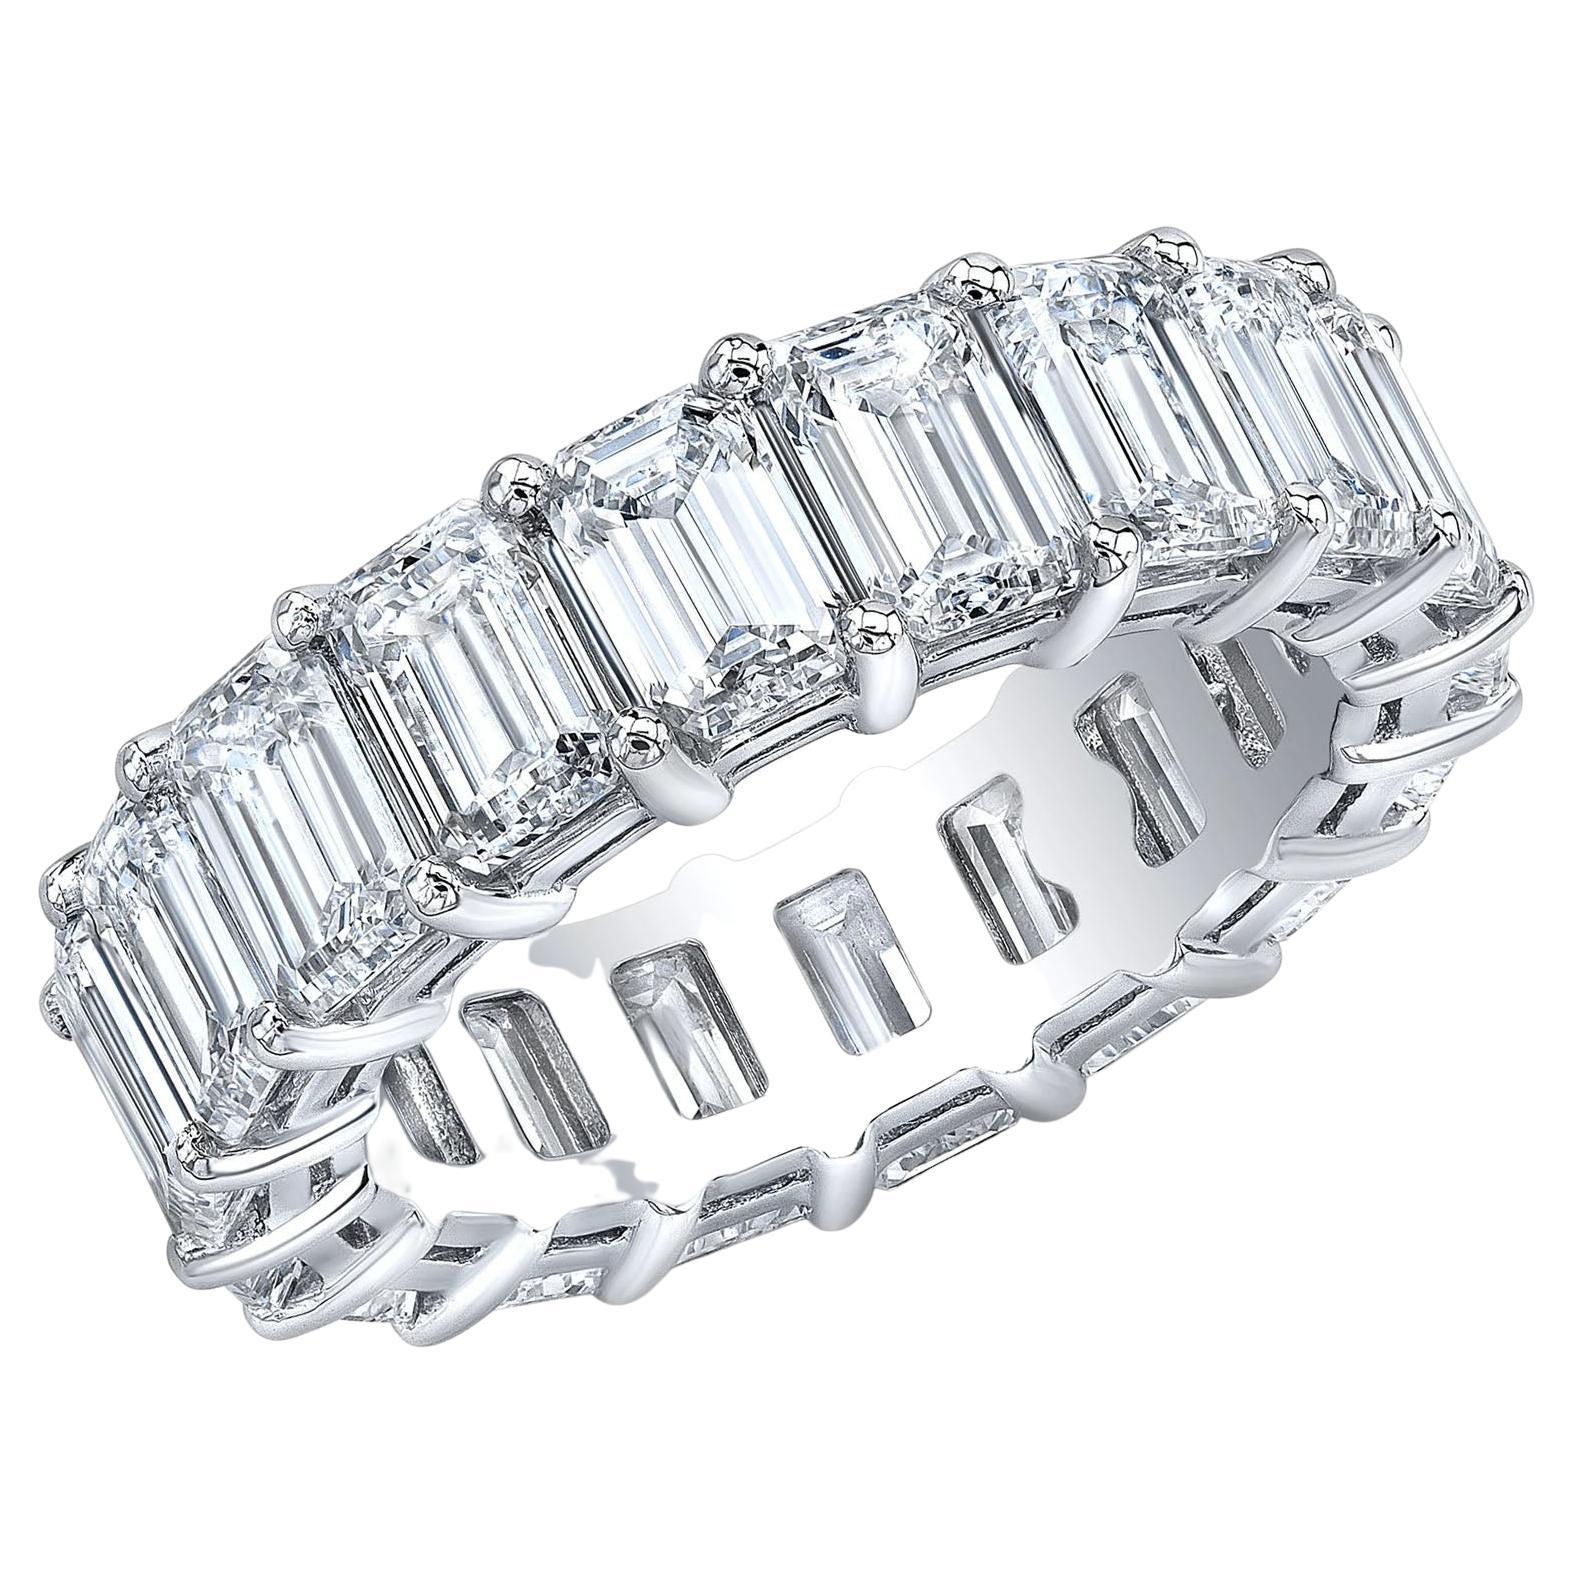 6 Carats Emerald Cut Eternity Band Shared Prongs F-G Color VS1 Clarity 18k Gold